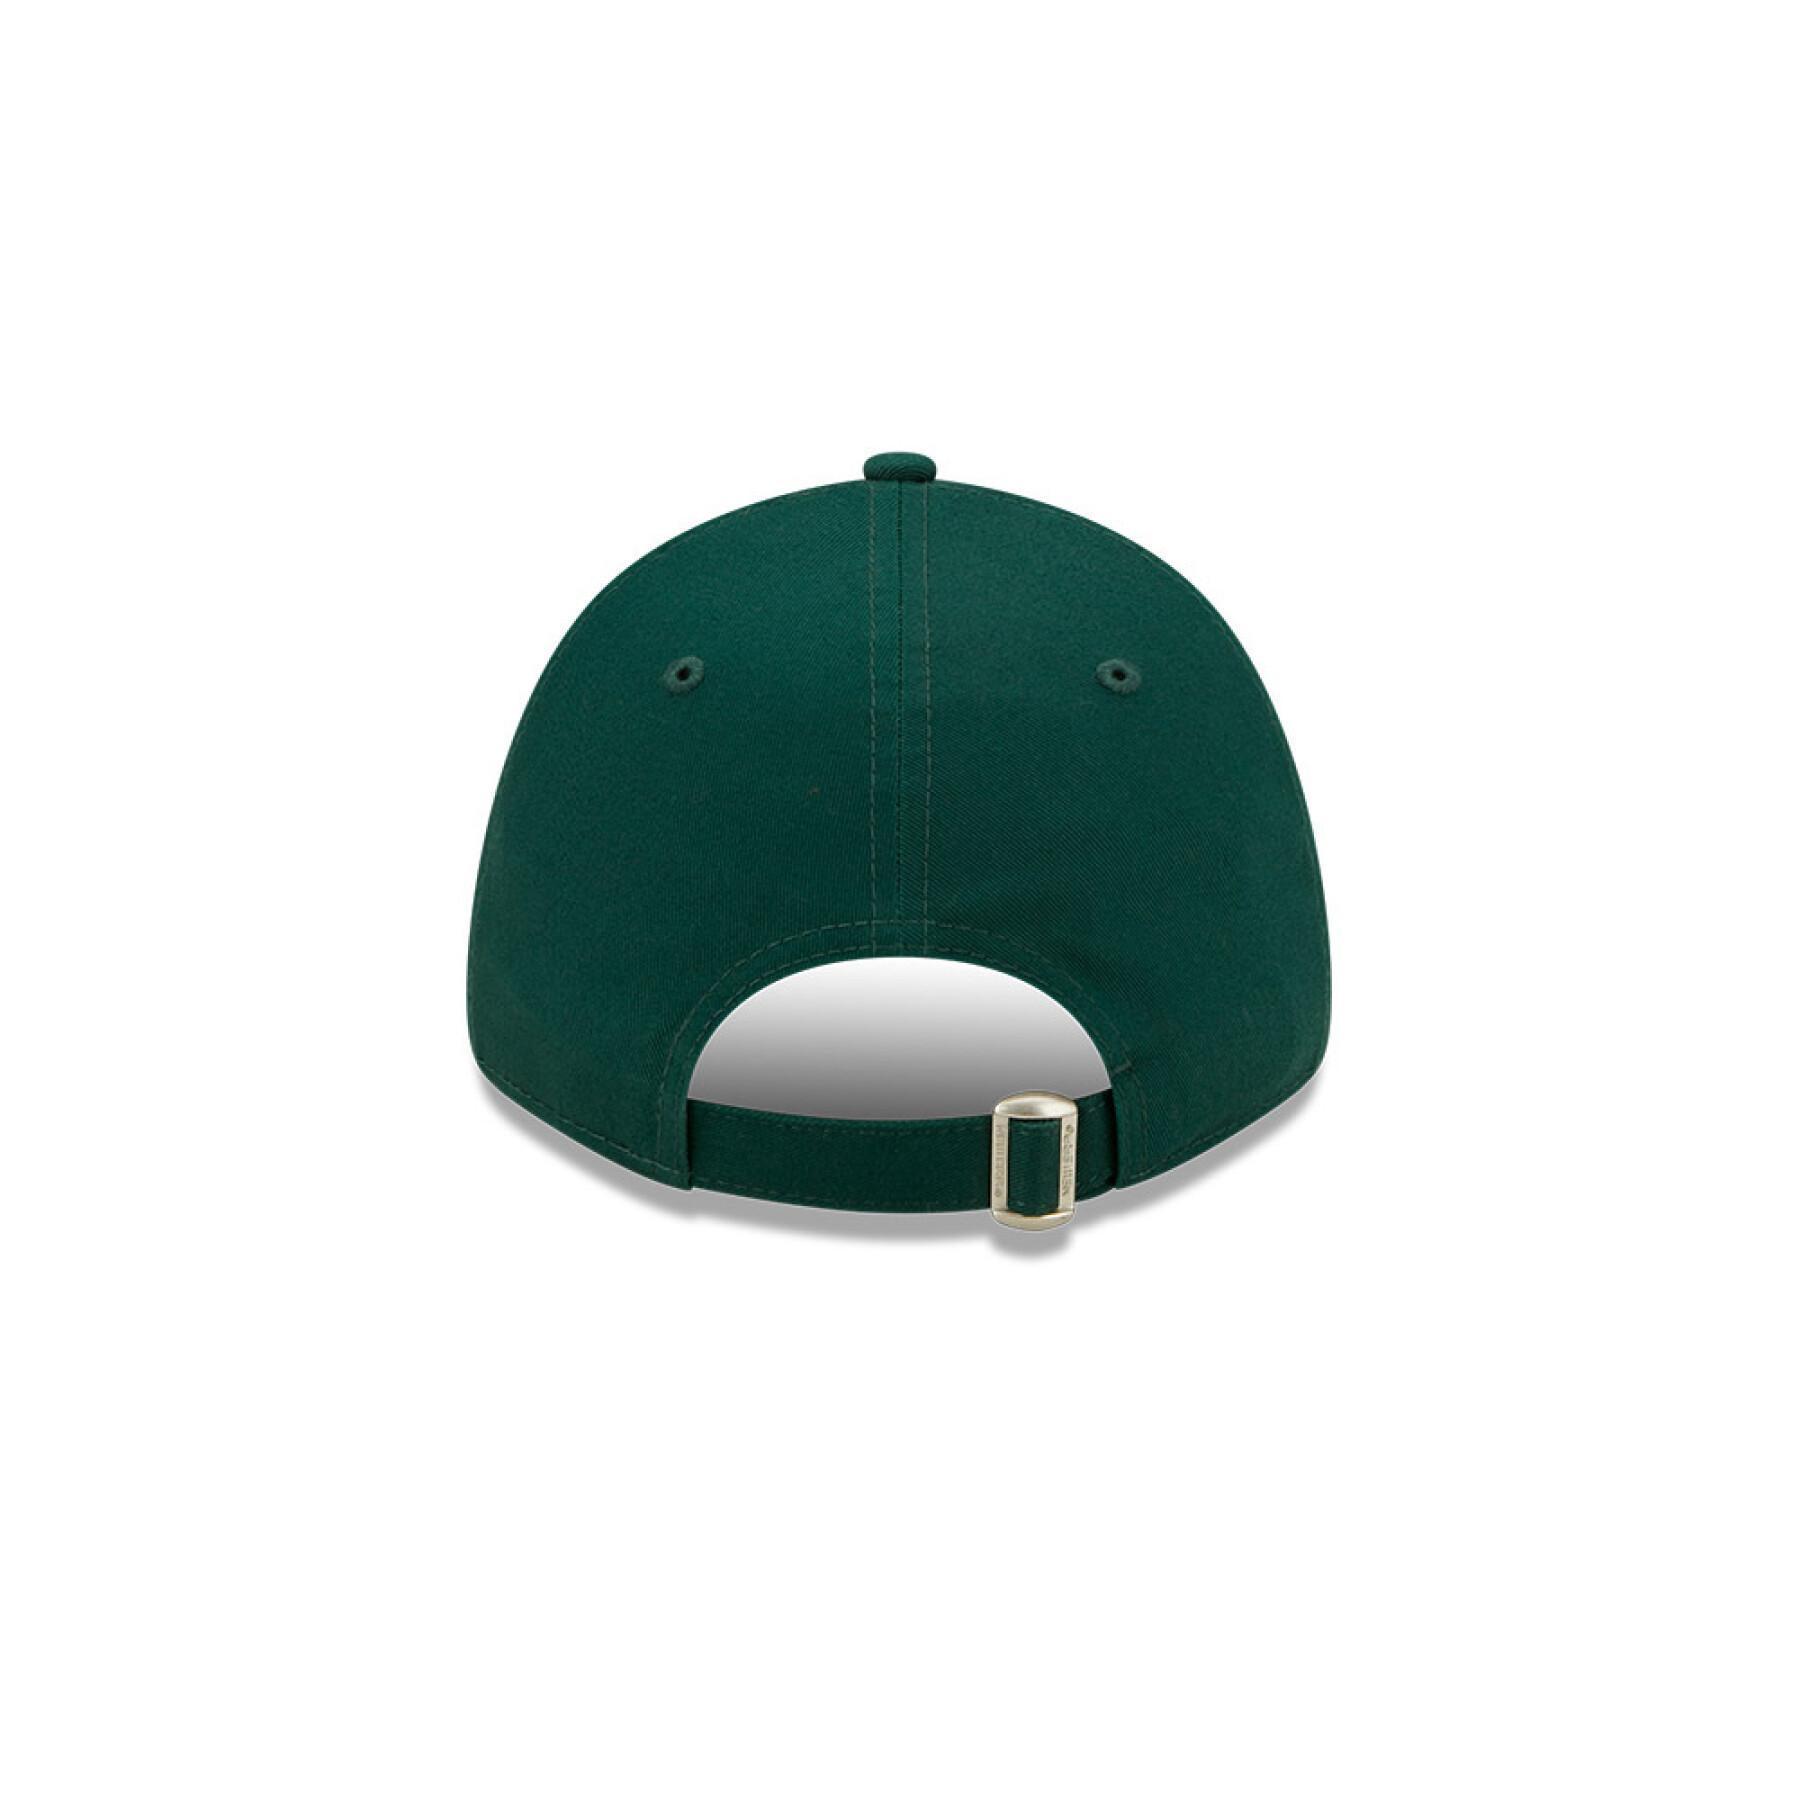 9forty cap New York Yankees League Essential